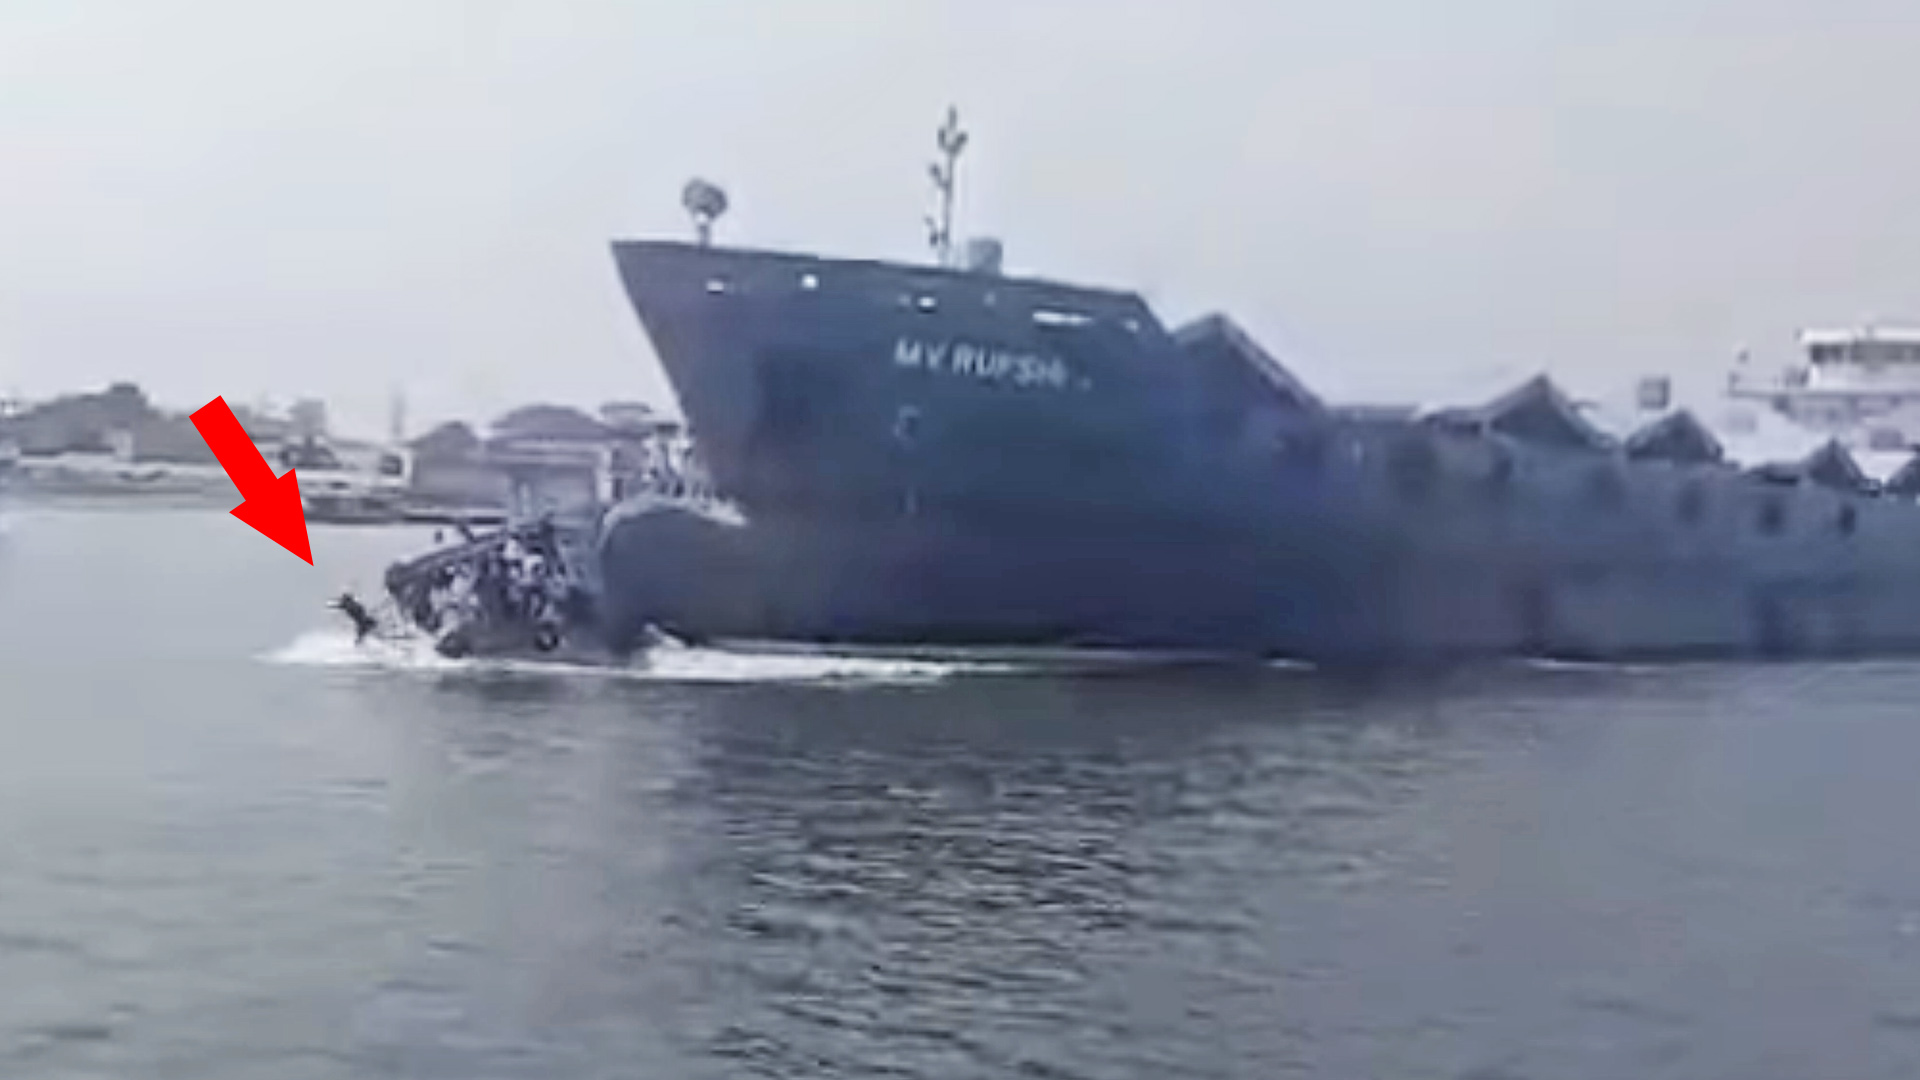 Ferry struck by a Cargo ship thrusting her 500 meters while some passengers jumped overboard before sinking.